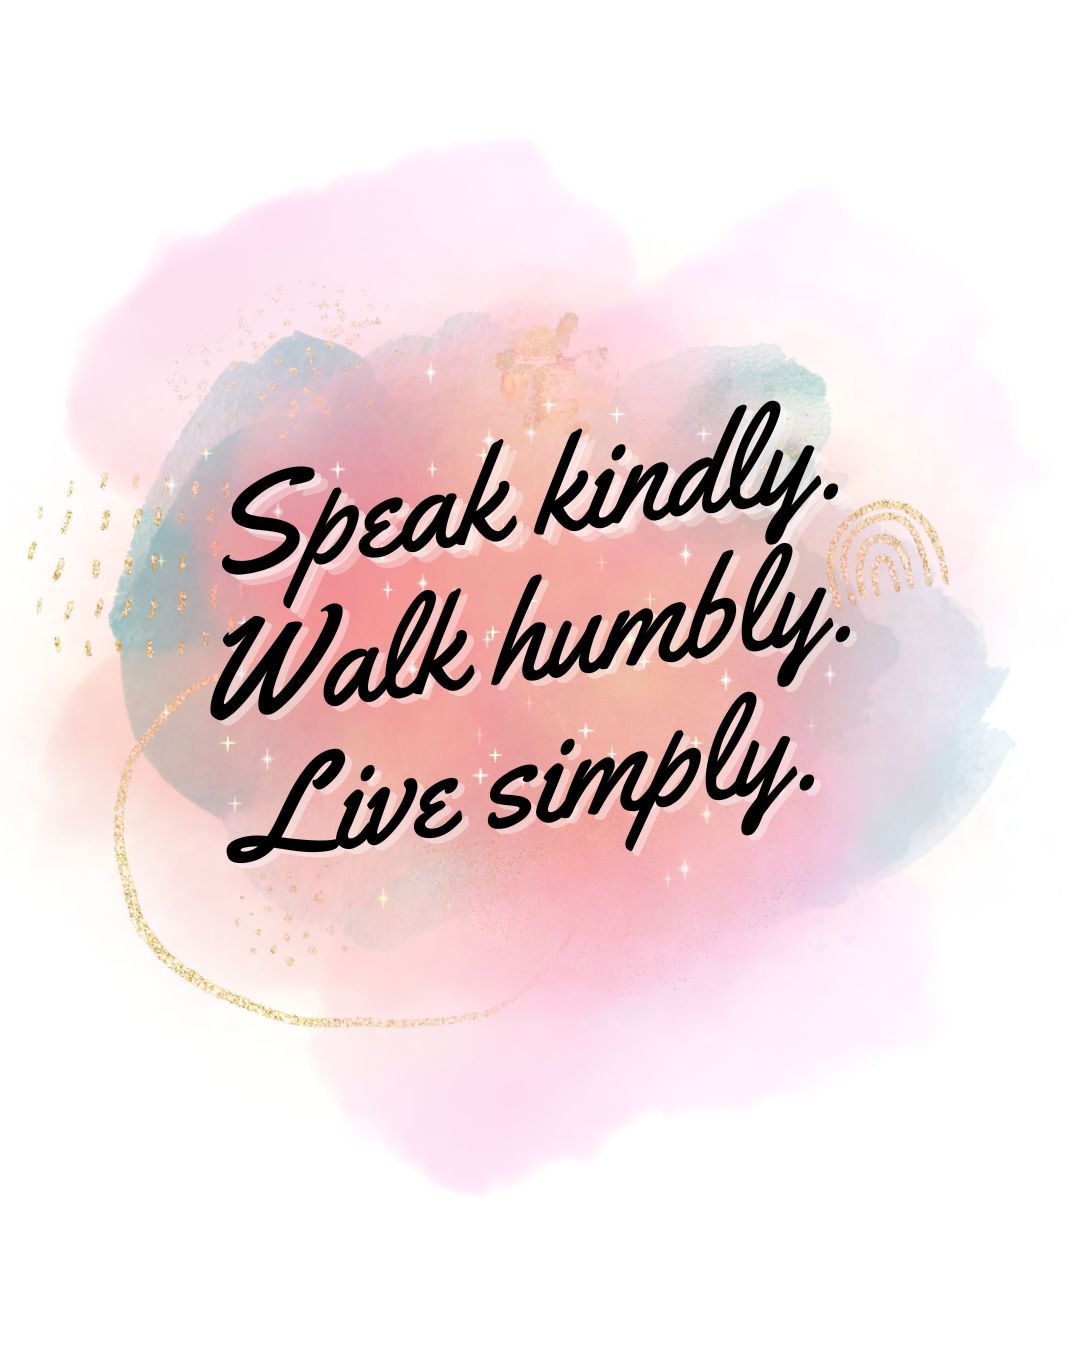 Speak kindly. Walk humbly. Live simply.